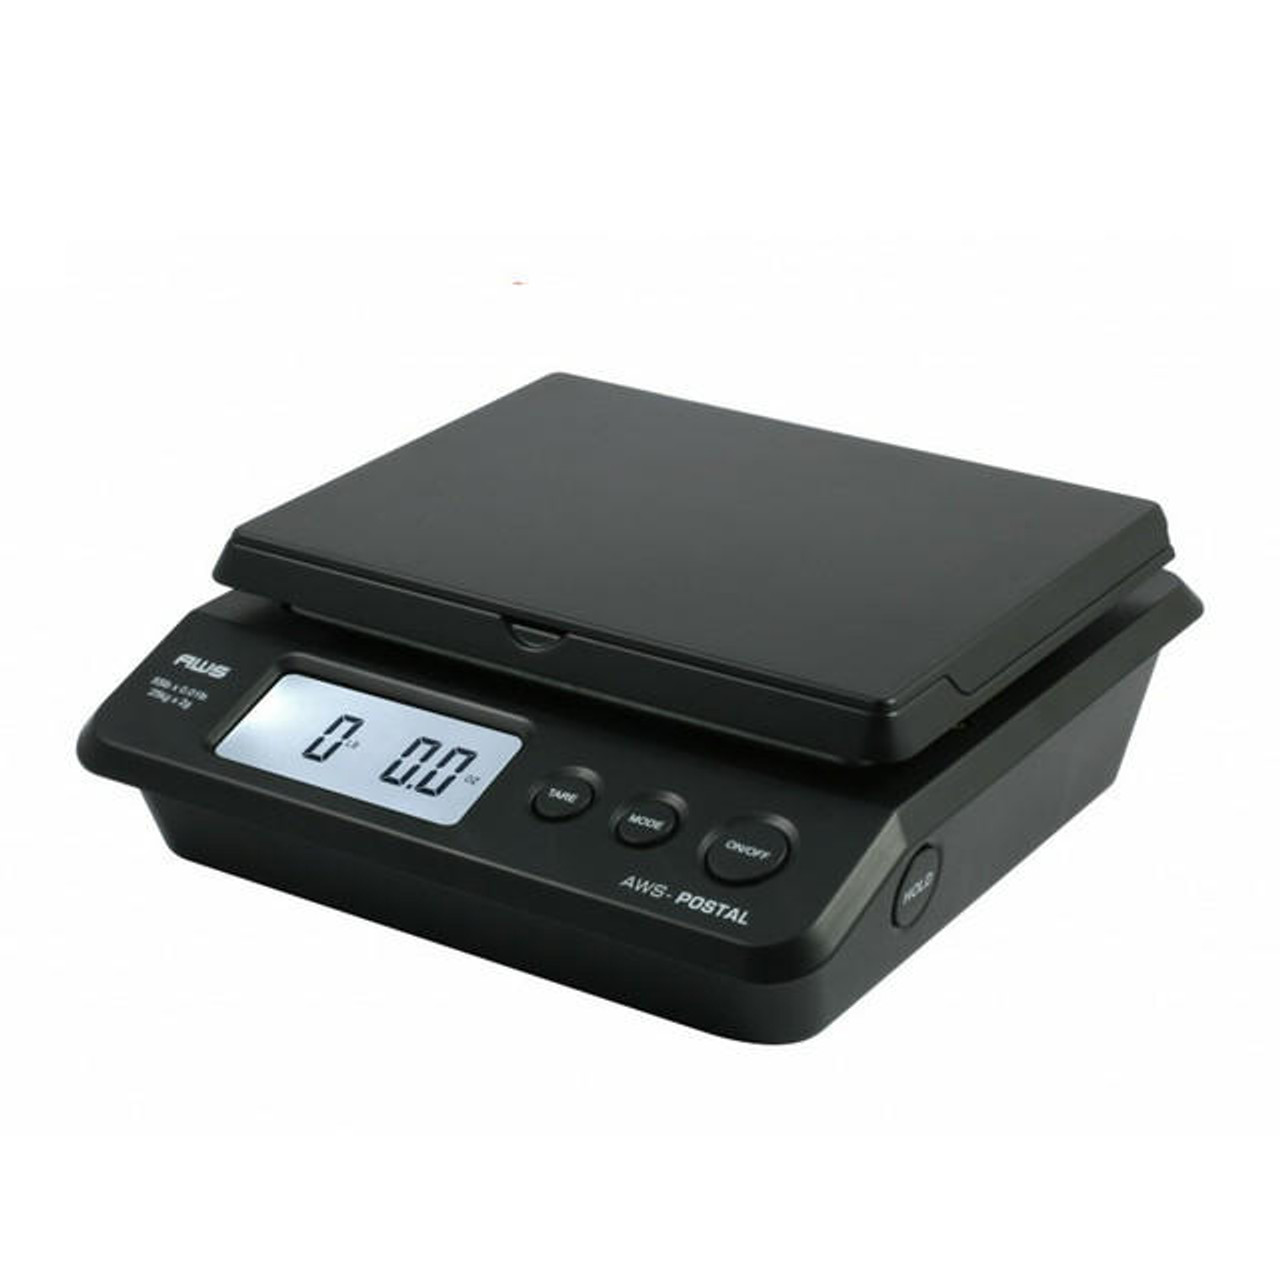 https://cdn11.bigcommerce.com/s-errhy7umuu/images/stencil/1280x1280/products/13255/50447/american-weigh-scales-aws-ps-25-digital-postage-scale-55-lb-x-0.01-lb__94051.1701105189.jpg?c=2